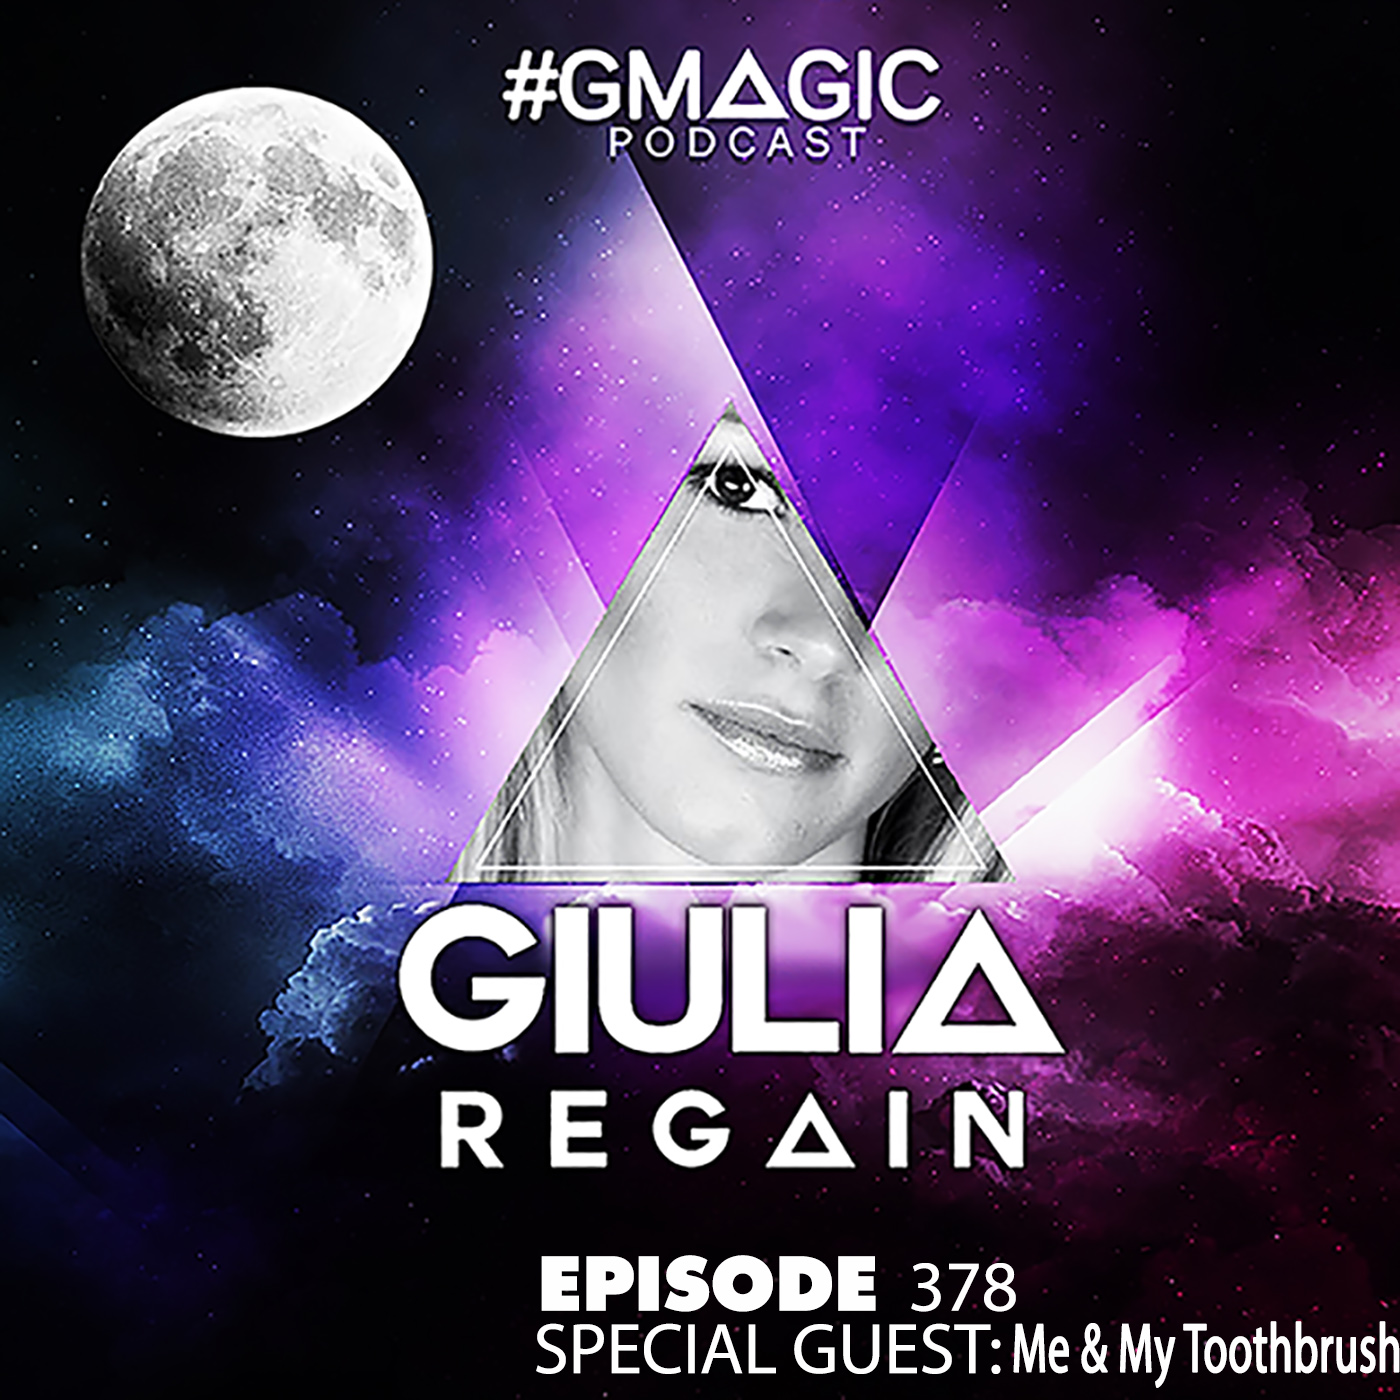 Gmagic Podcast #378-Special Guest: ME & MY TOOTHBRUSH